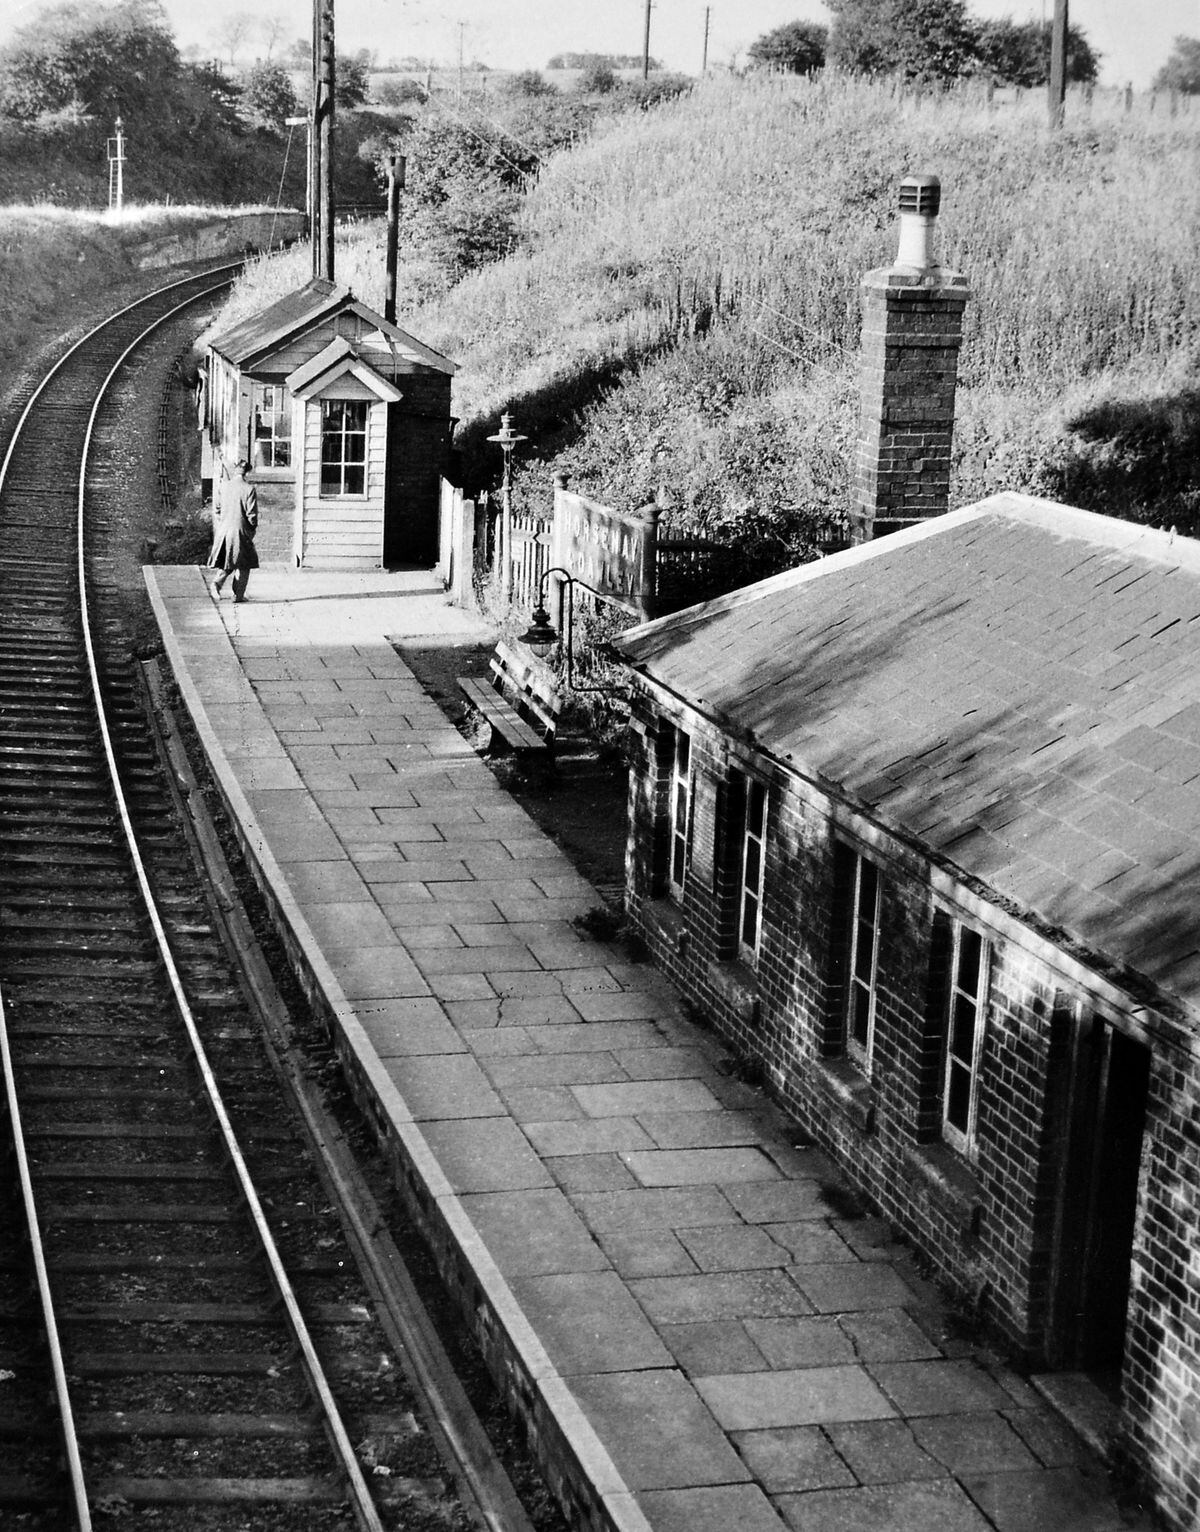 Horsehay & Dawley railway station, photographed in February 1962 - not long before it closed.